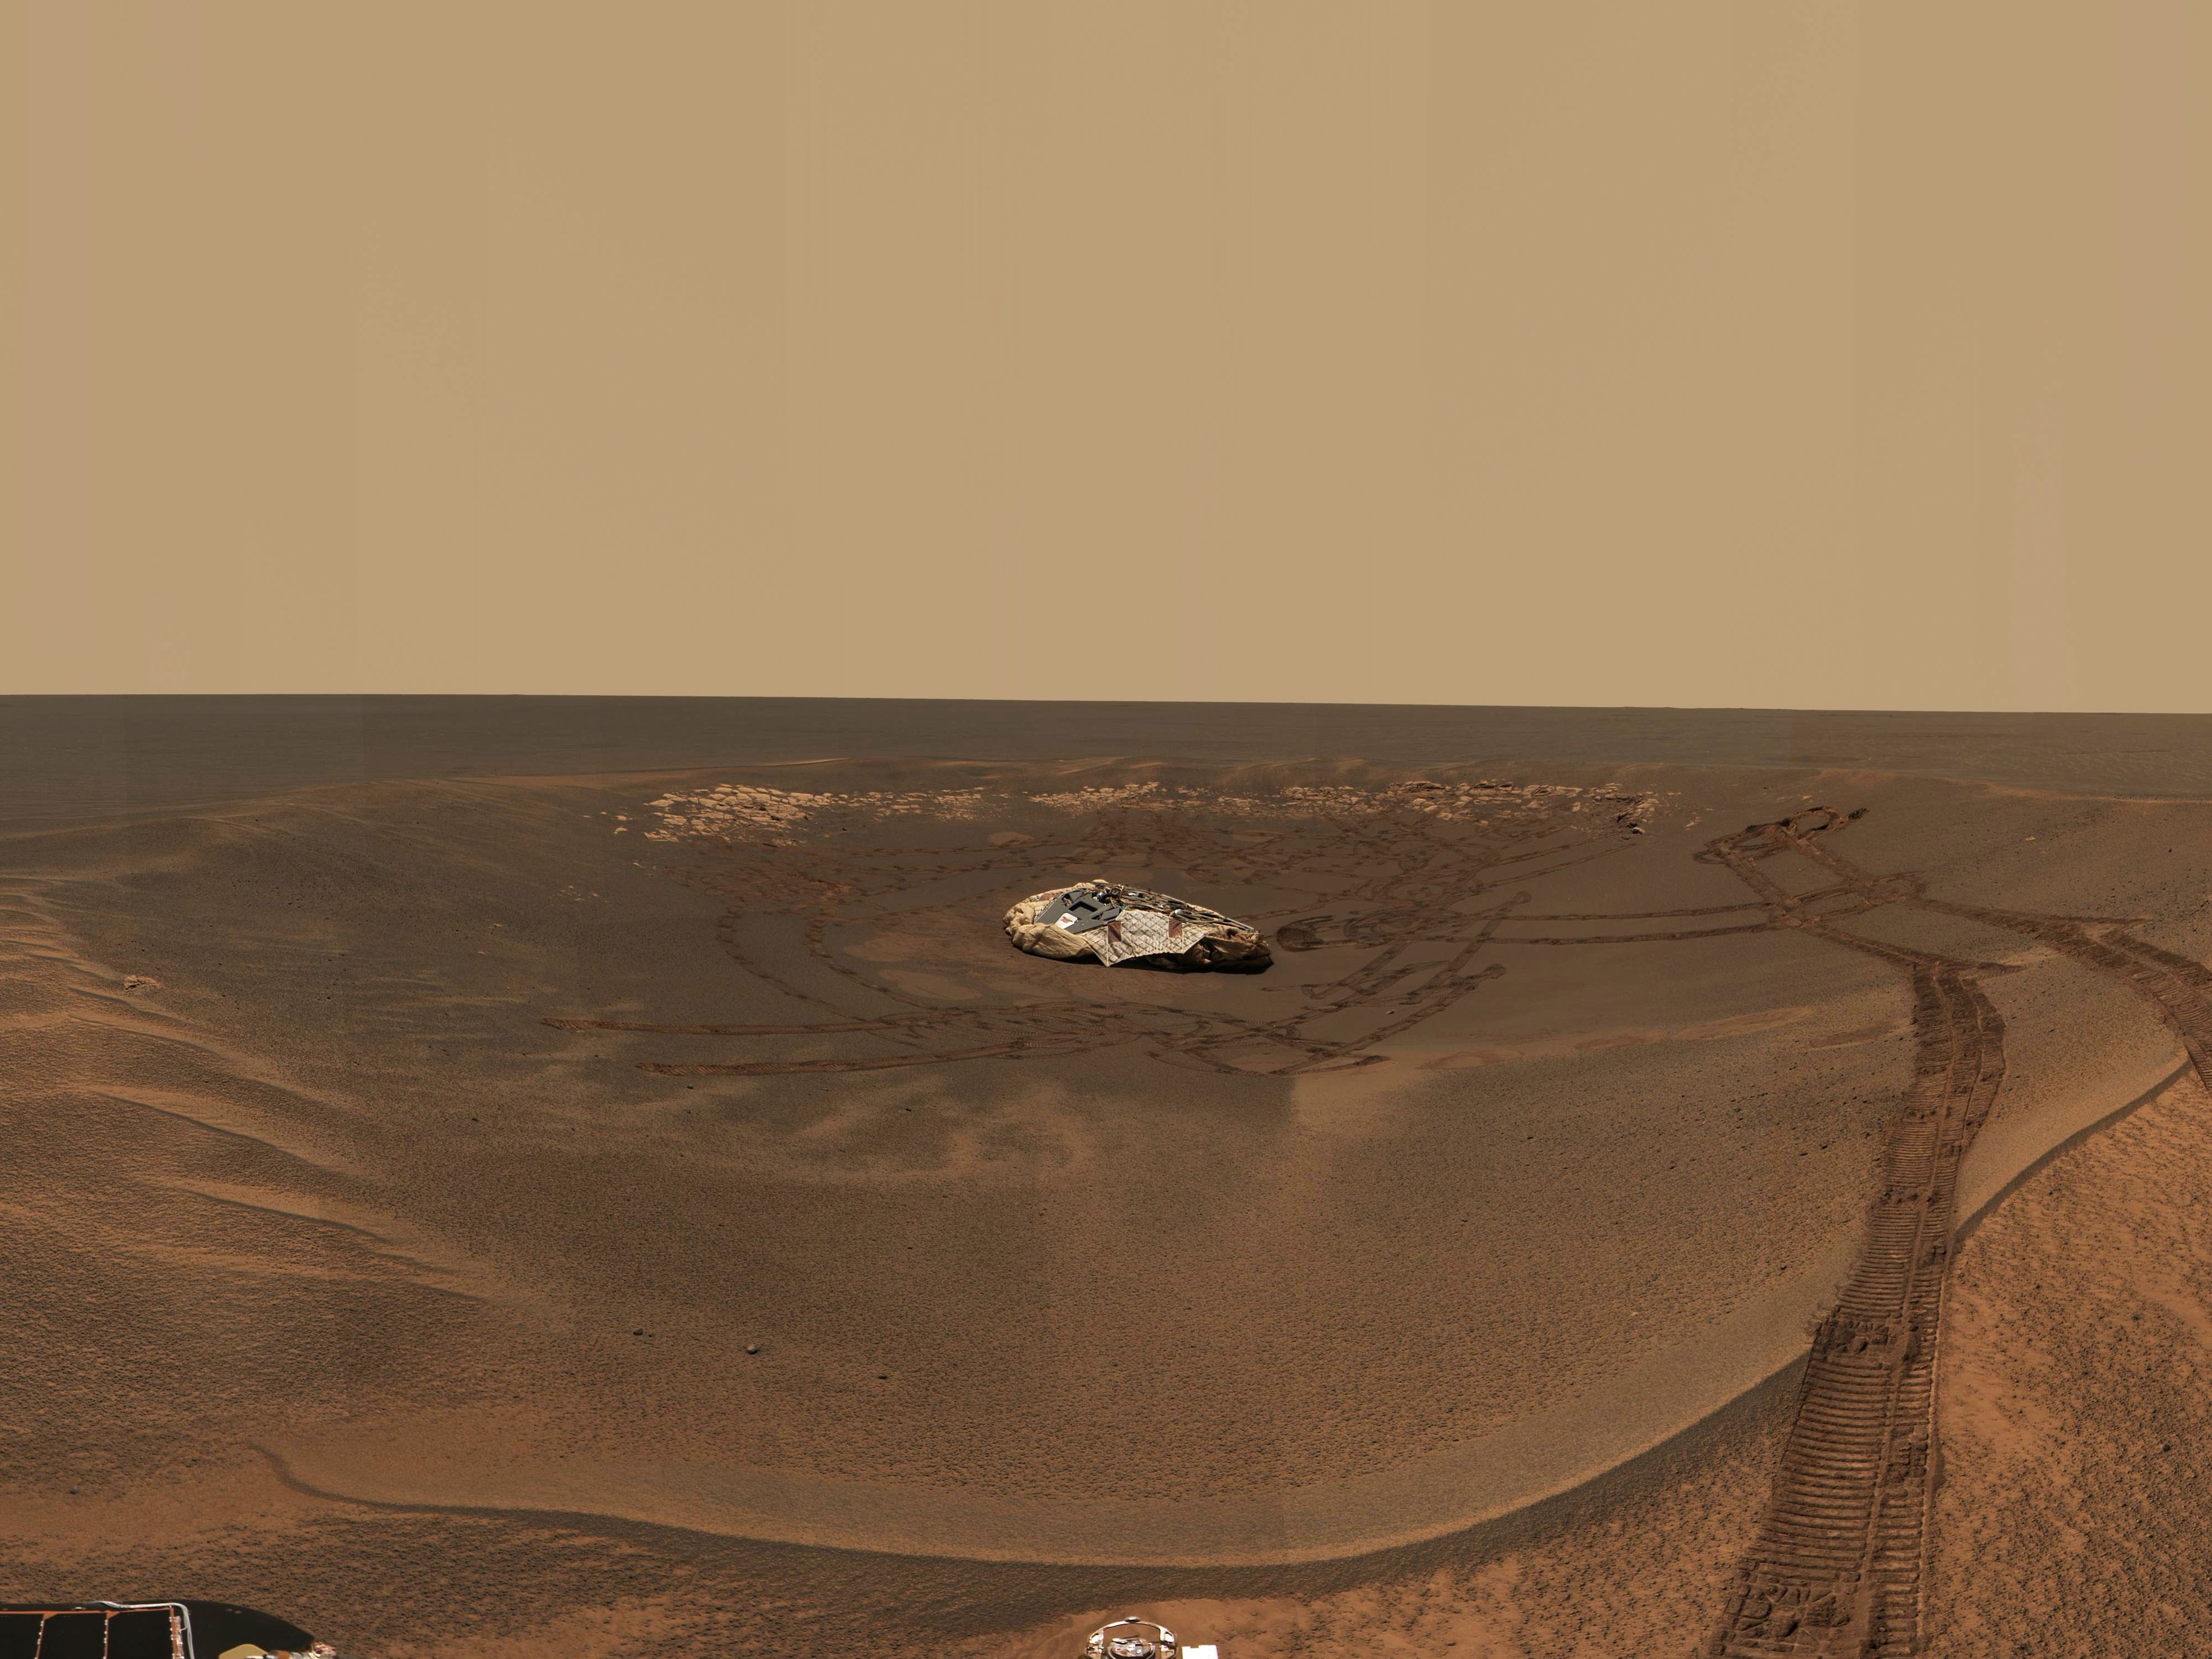 A landscape on Mars shows the horizon cutting across the middle of the photo,